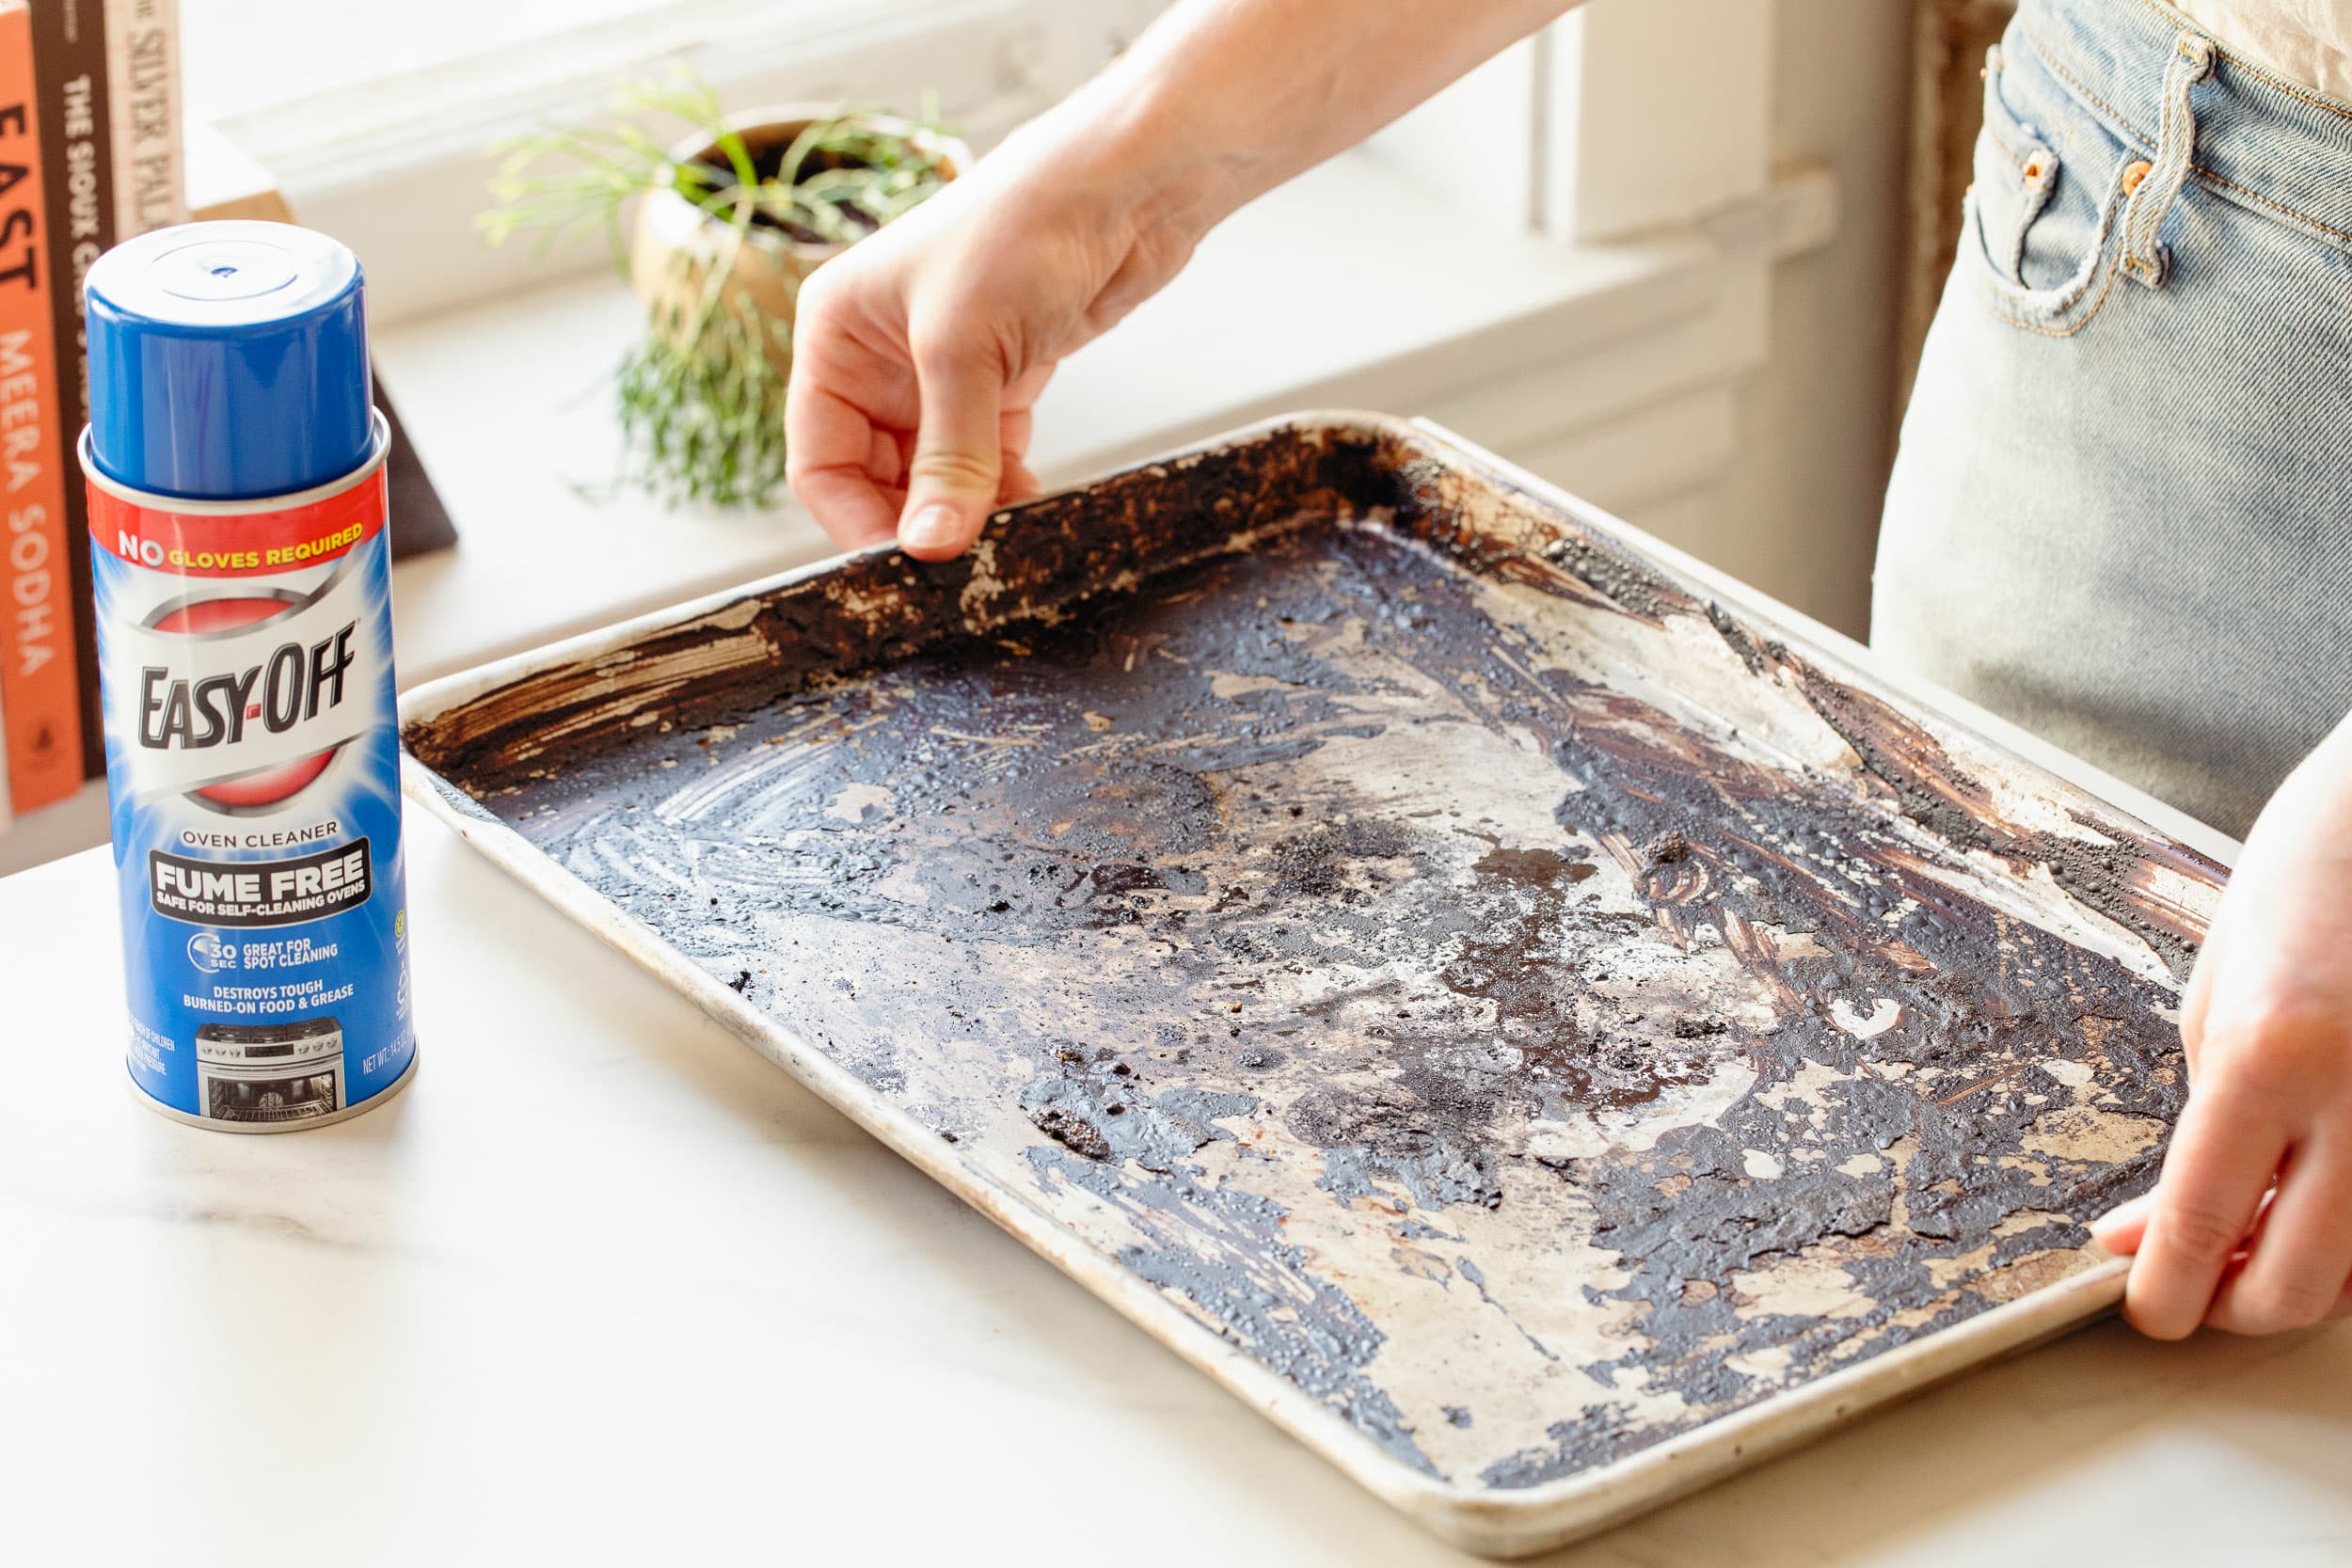 Using Oven Cleaner to Clean Baking Sheets - Review